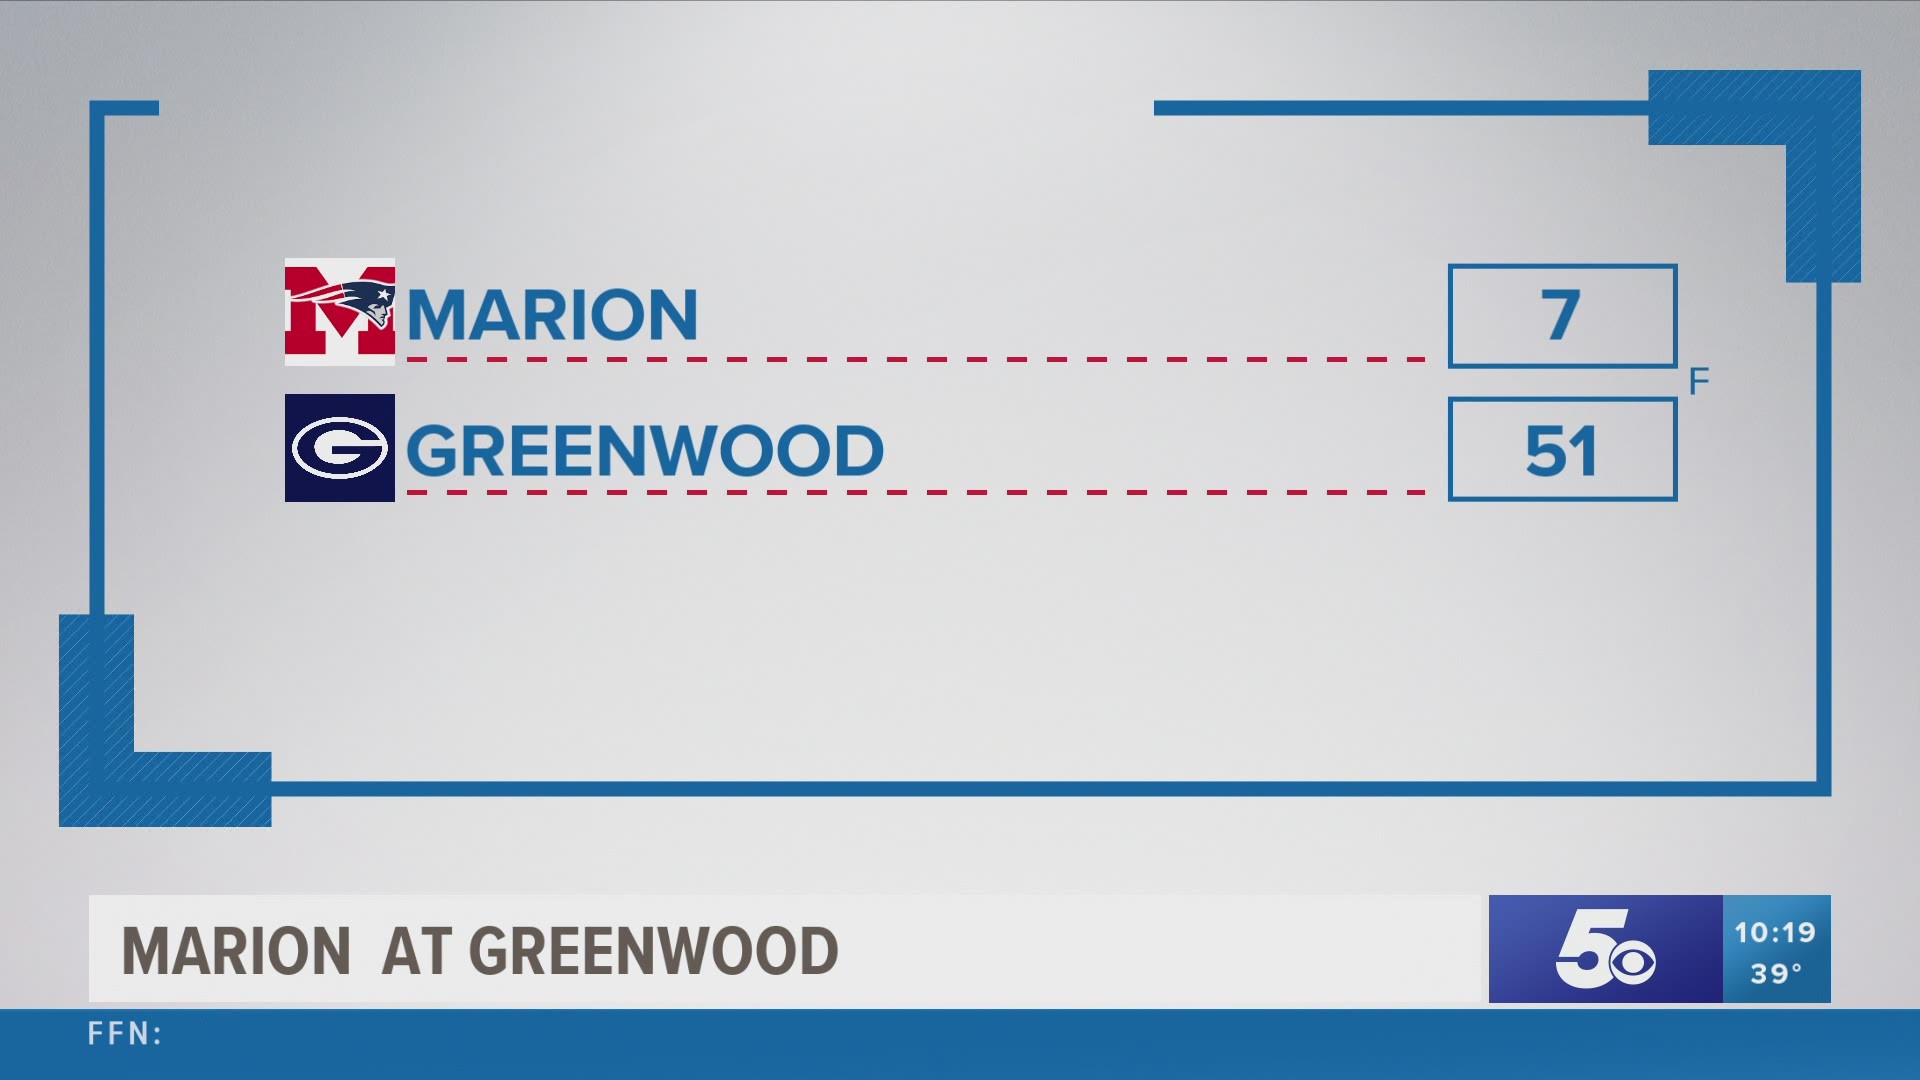 Greenwood defeated Marion 51-7